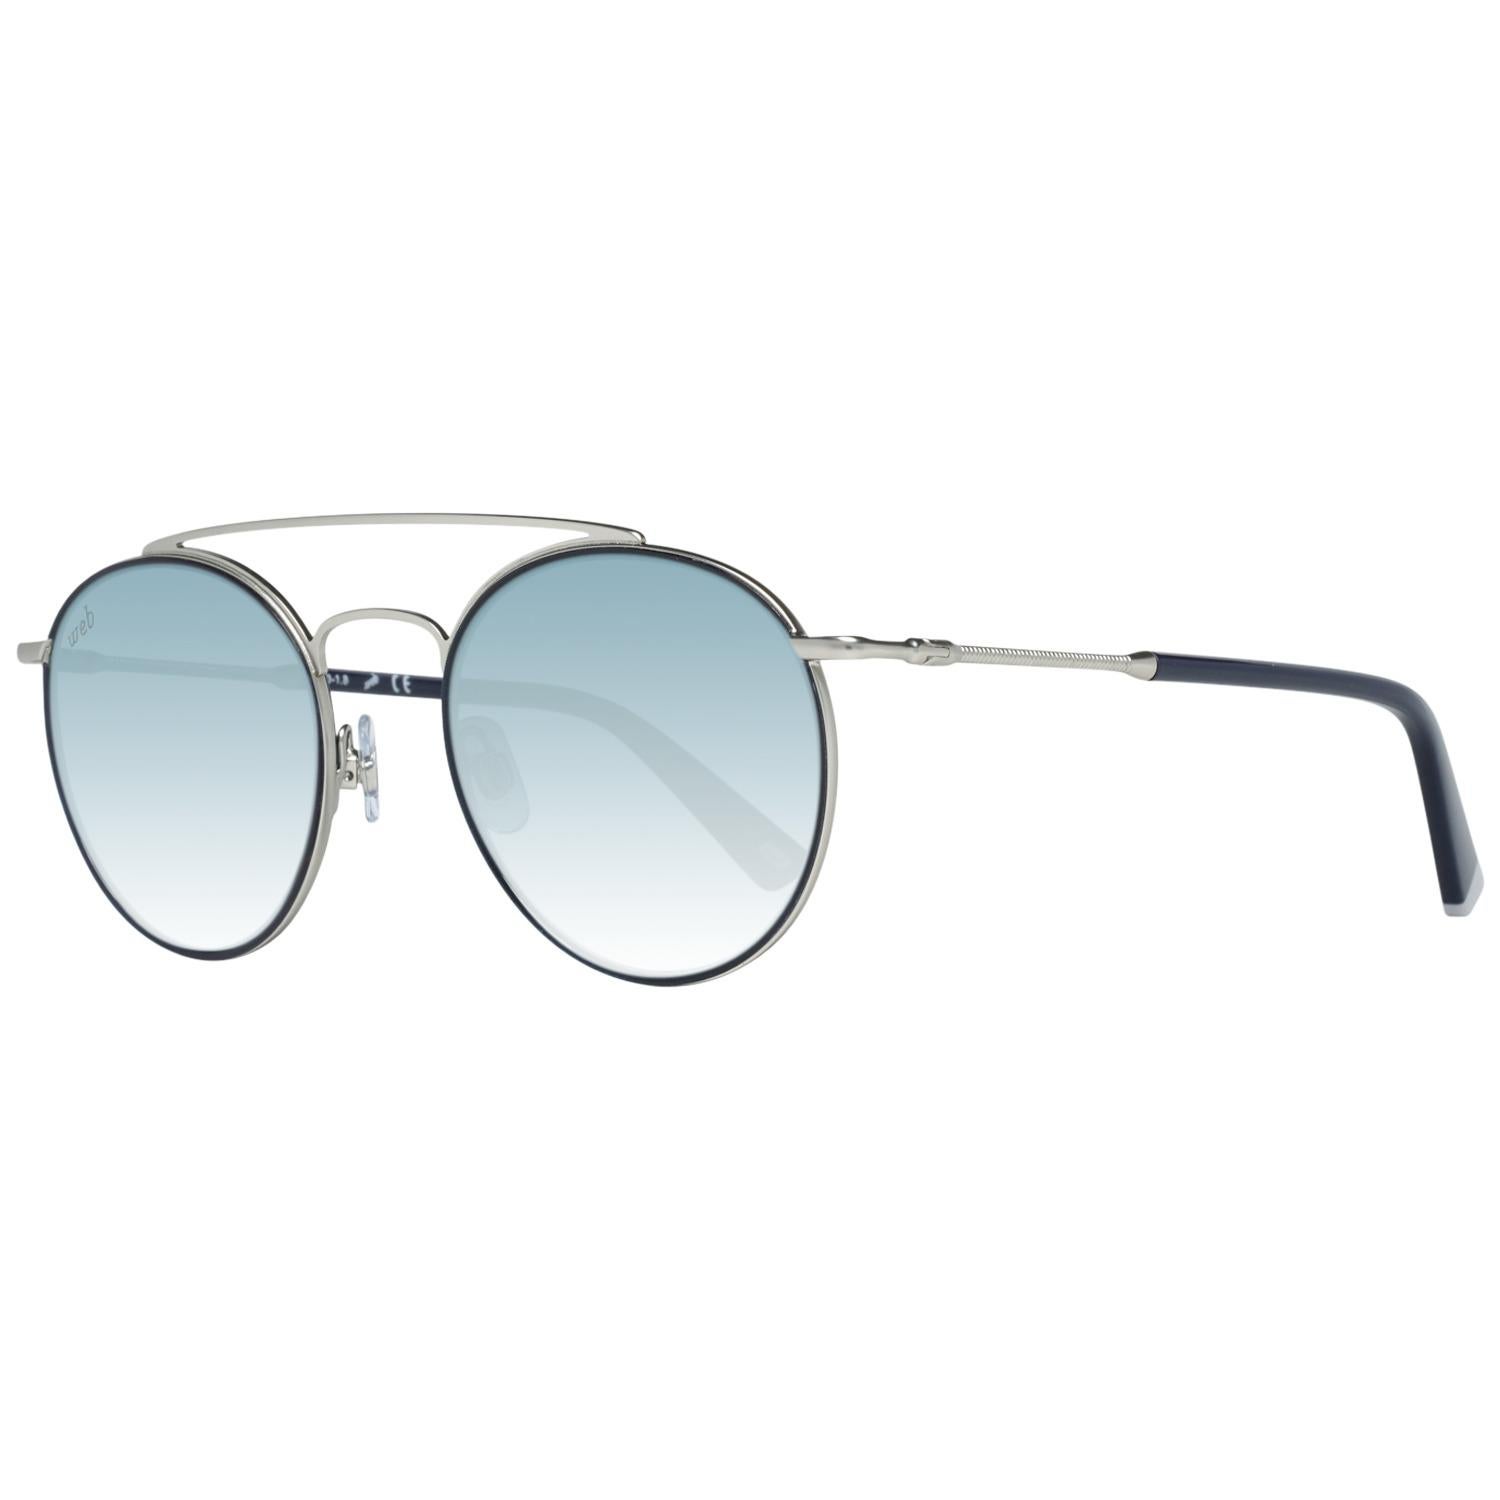 Details
MATERIAL: Metal
COLOR: Silver
MODEL: WE0188 5115X
GENDER: Adult Unisex
COUNTRY OF MANUFACTURE: China
TYPE: Sunglasses
ORIGINAL CASE?: Yes
STYLE: Round
OCCASION: Casual
FEATURES: Lightweight
LENS COLOR: Blue
LENS TECHNOLOGY: Mirrored
YEAR